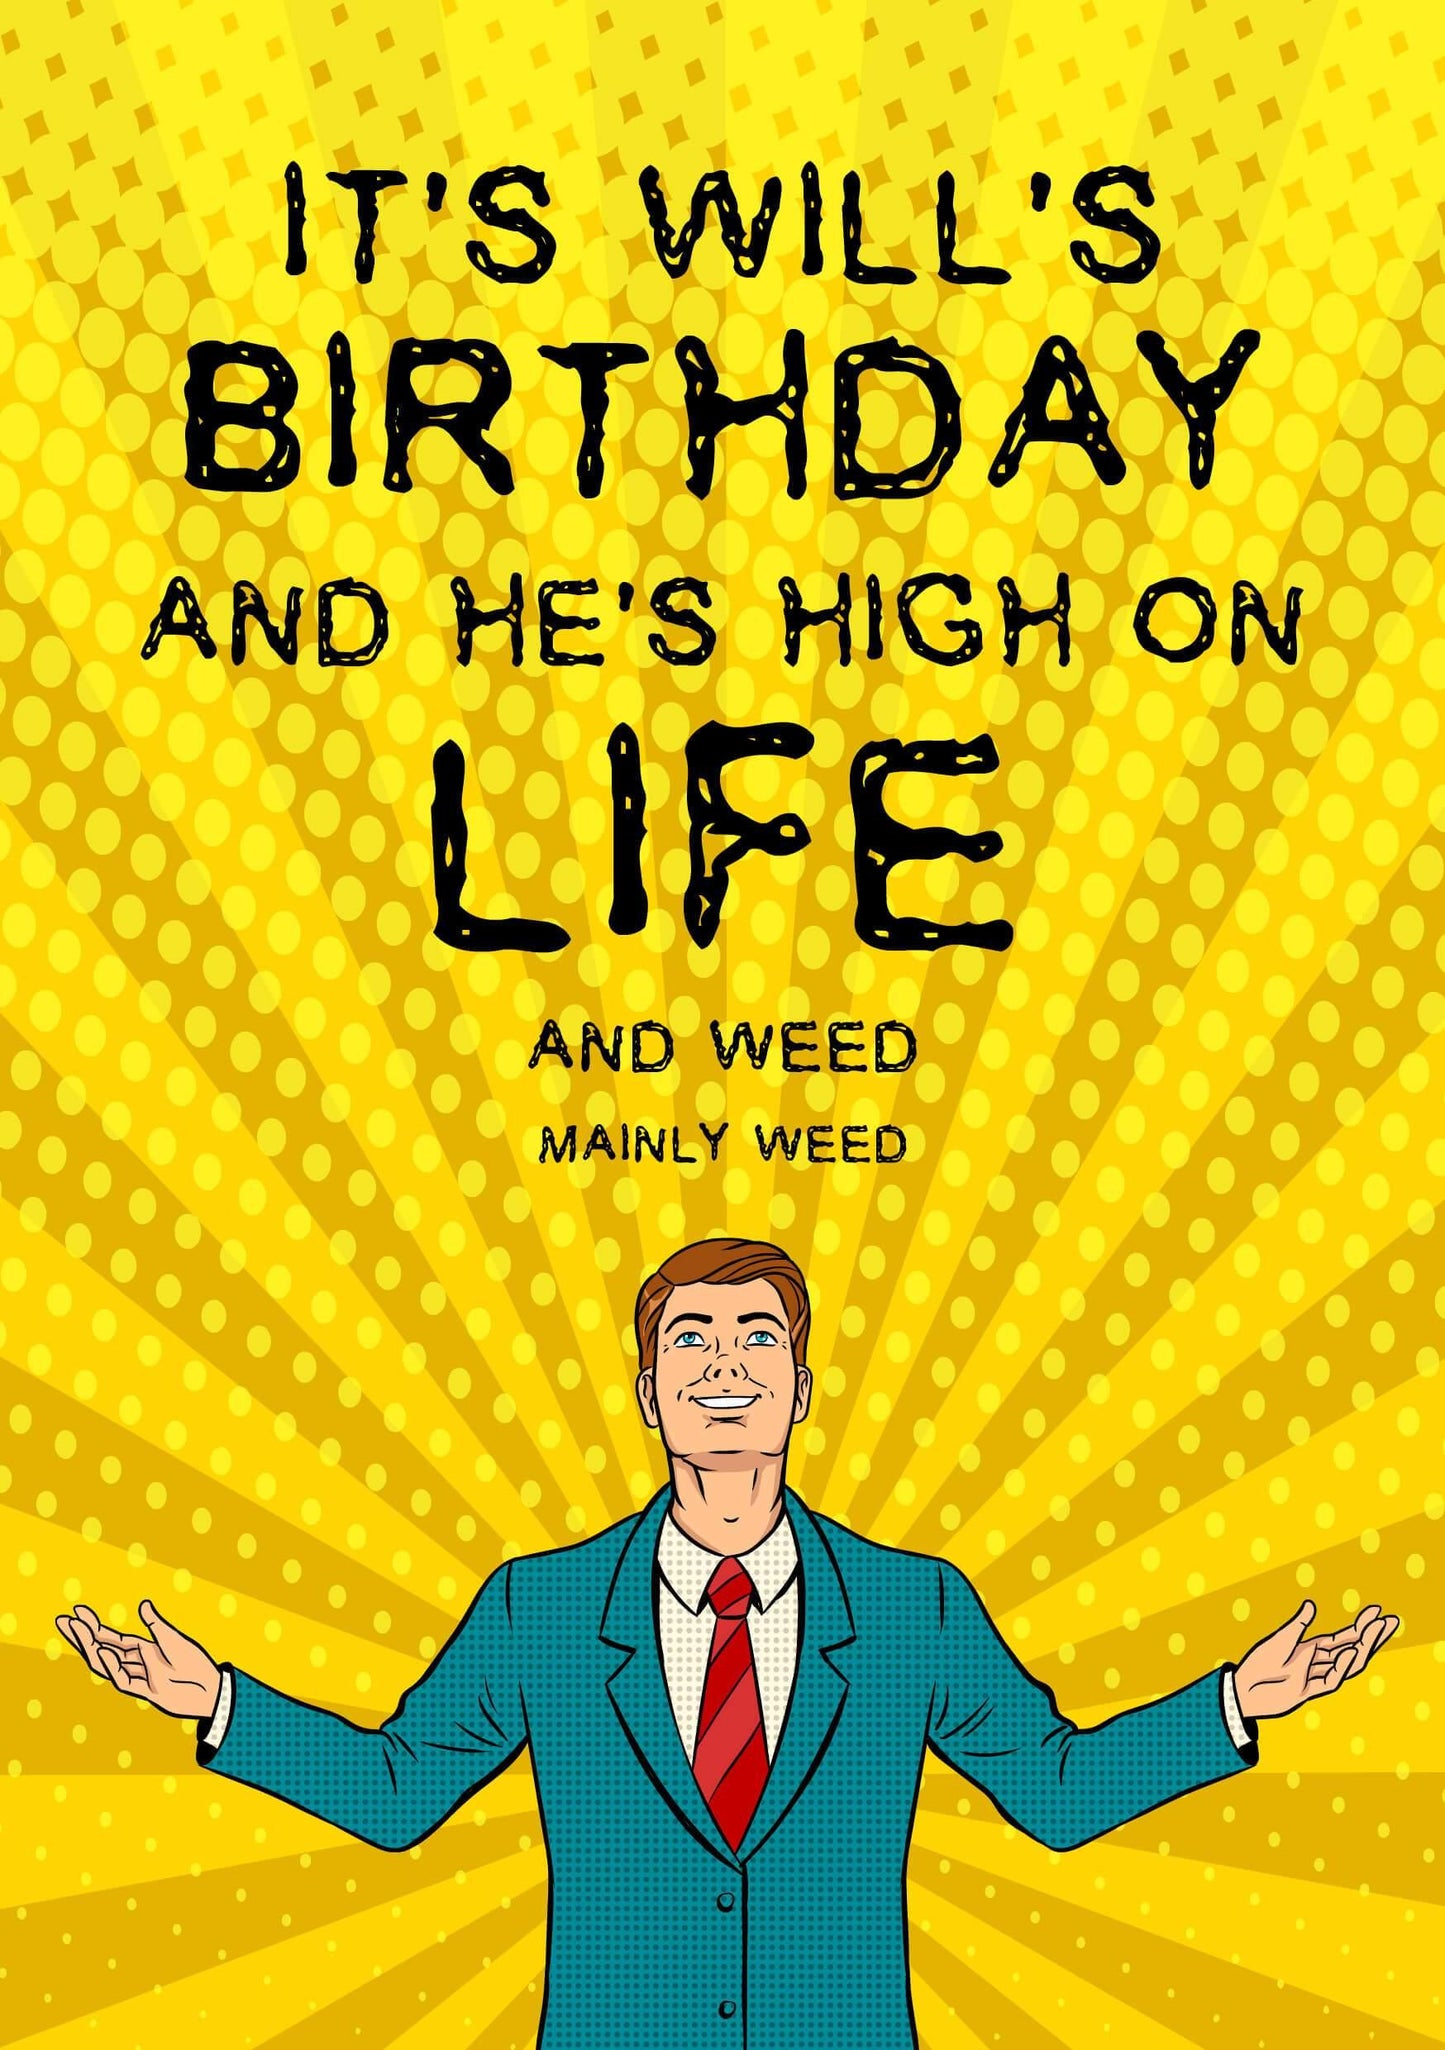 Celebrate his birthday with a unique High On Life Will greeting card from Twisted Gifts!